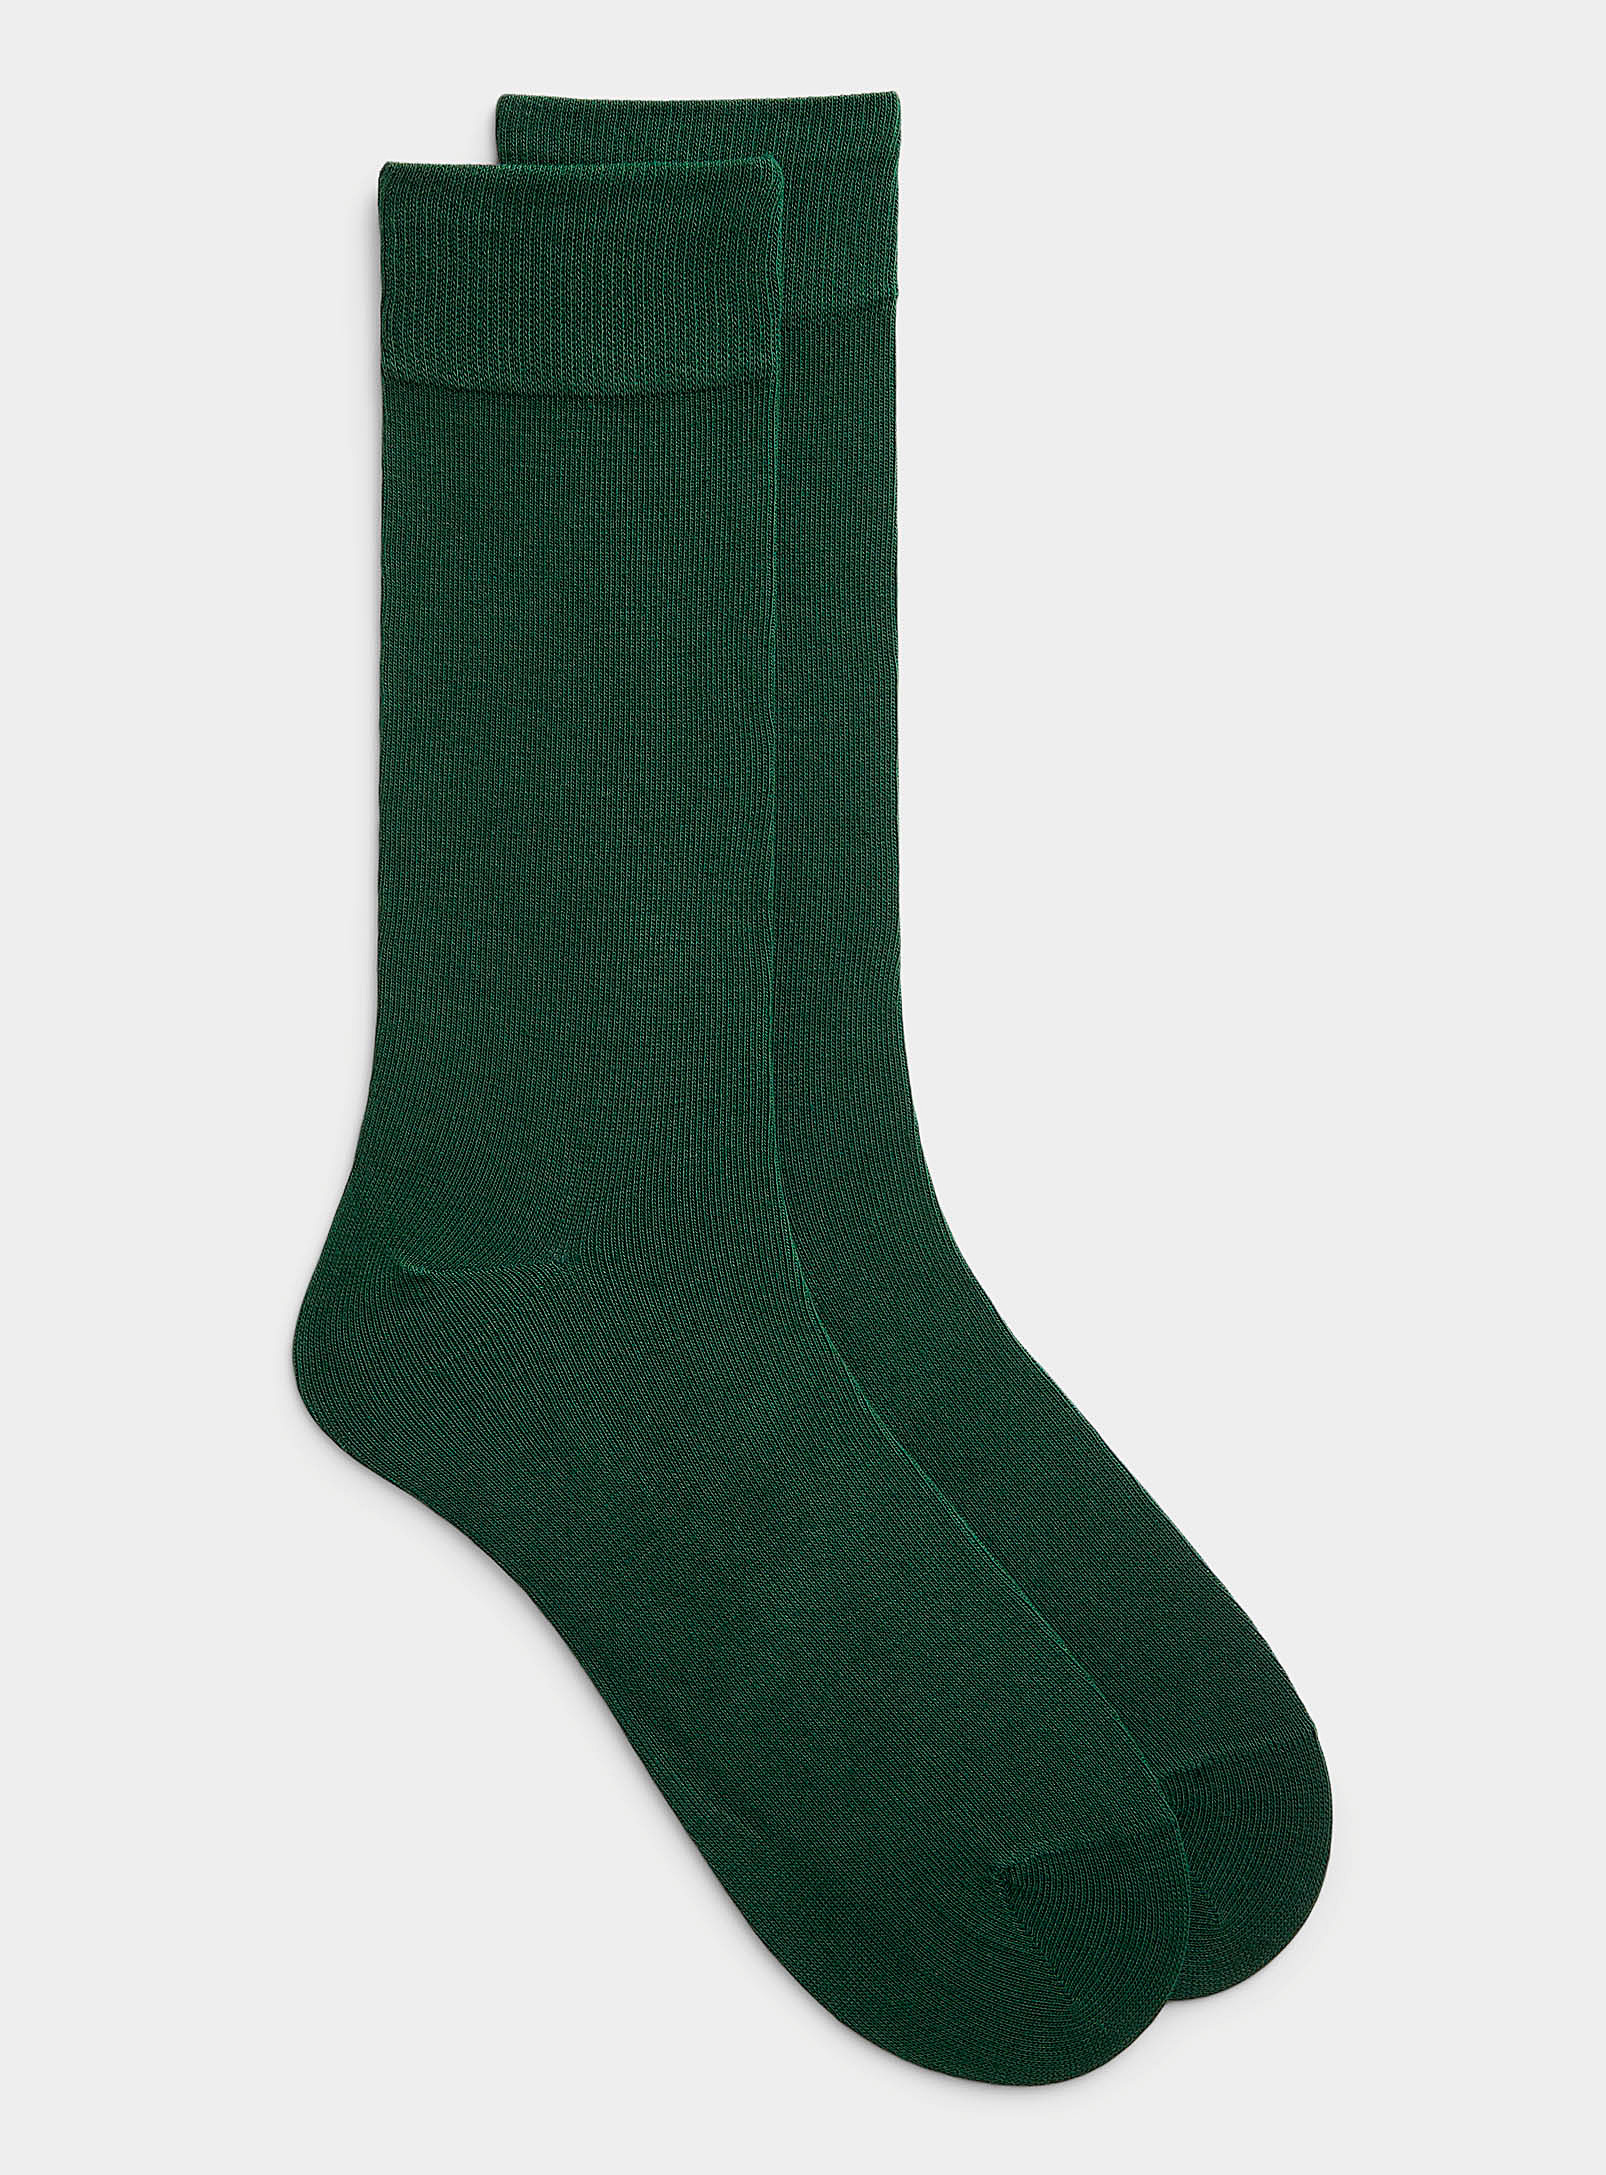 Le 31 Essential Organic Cotton Socks In Mossy Green